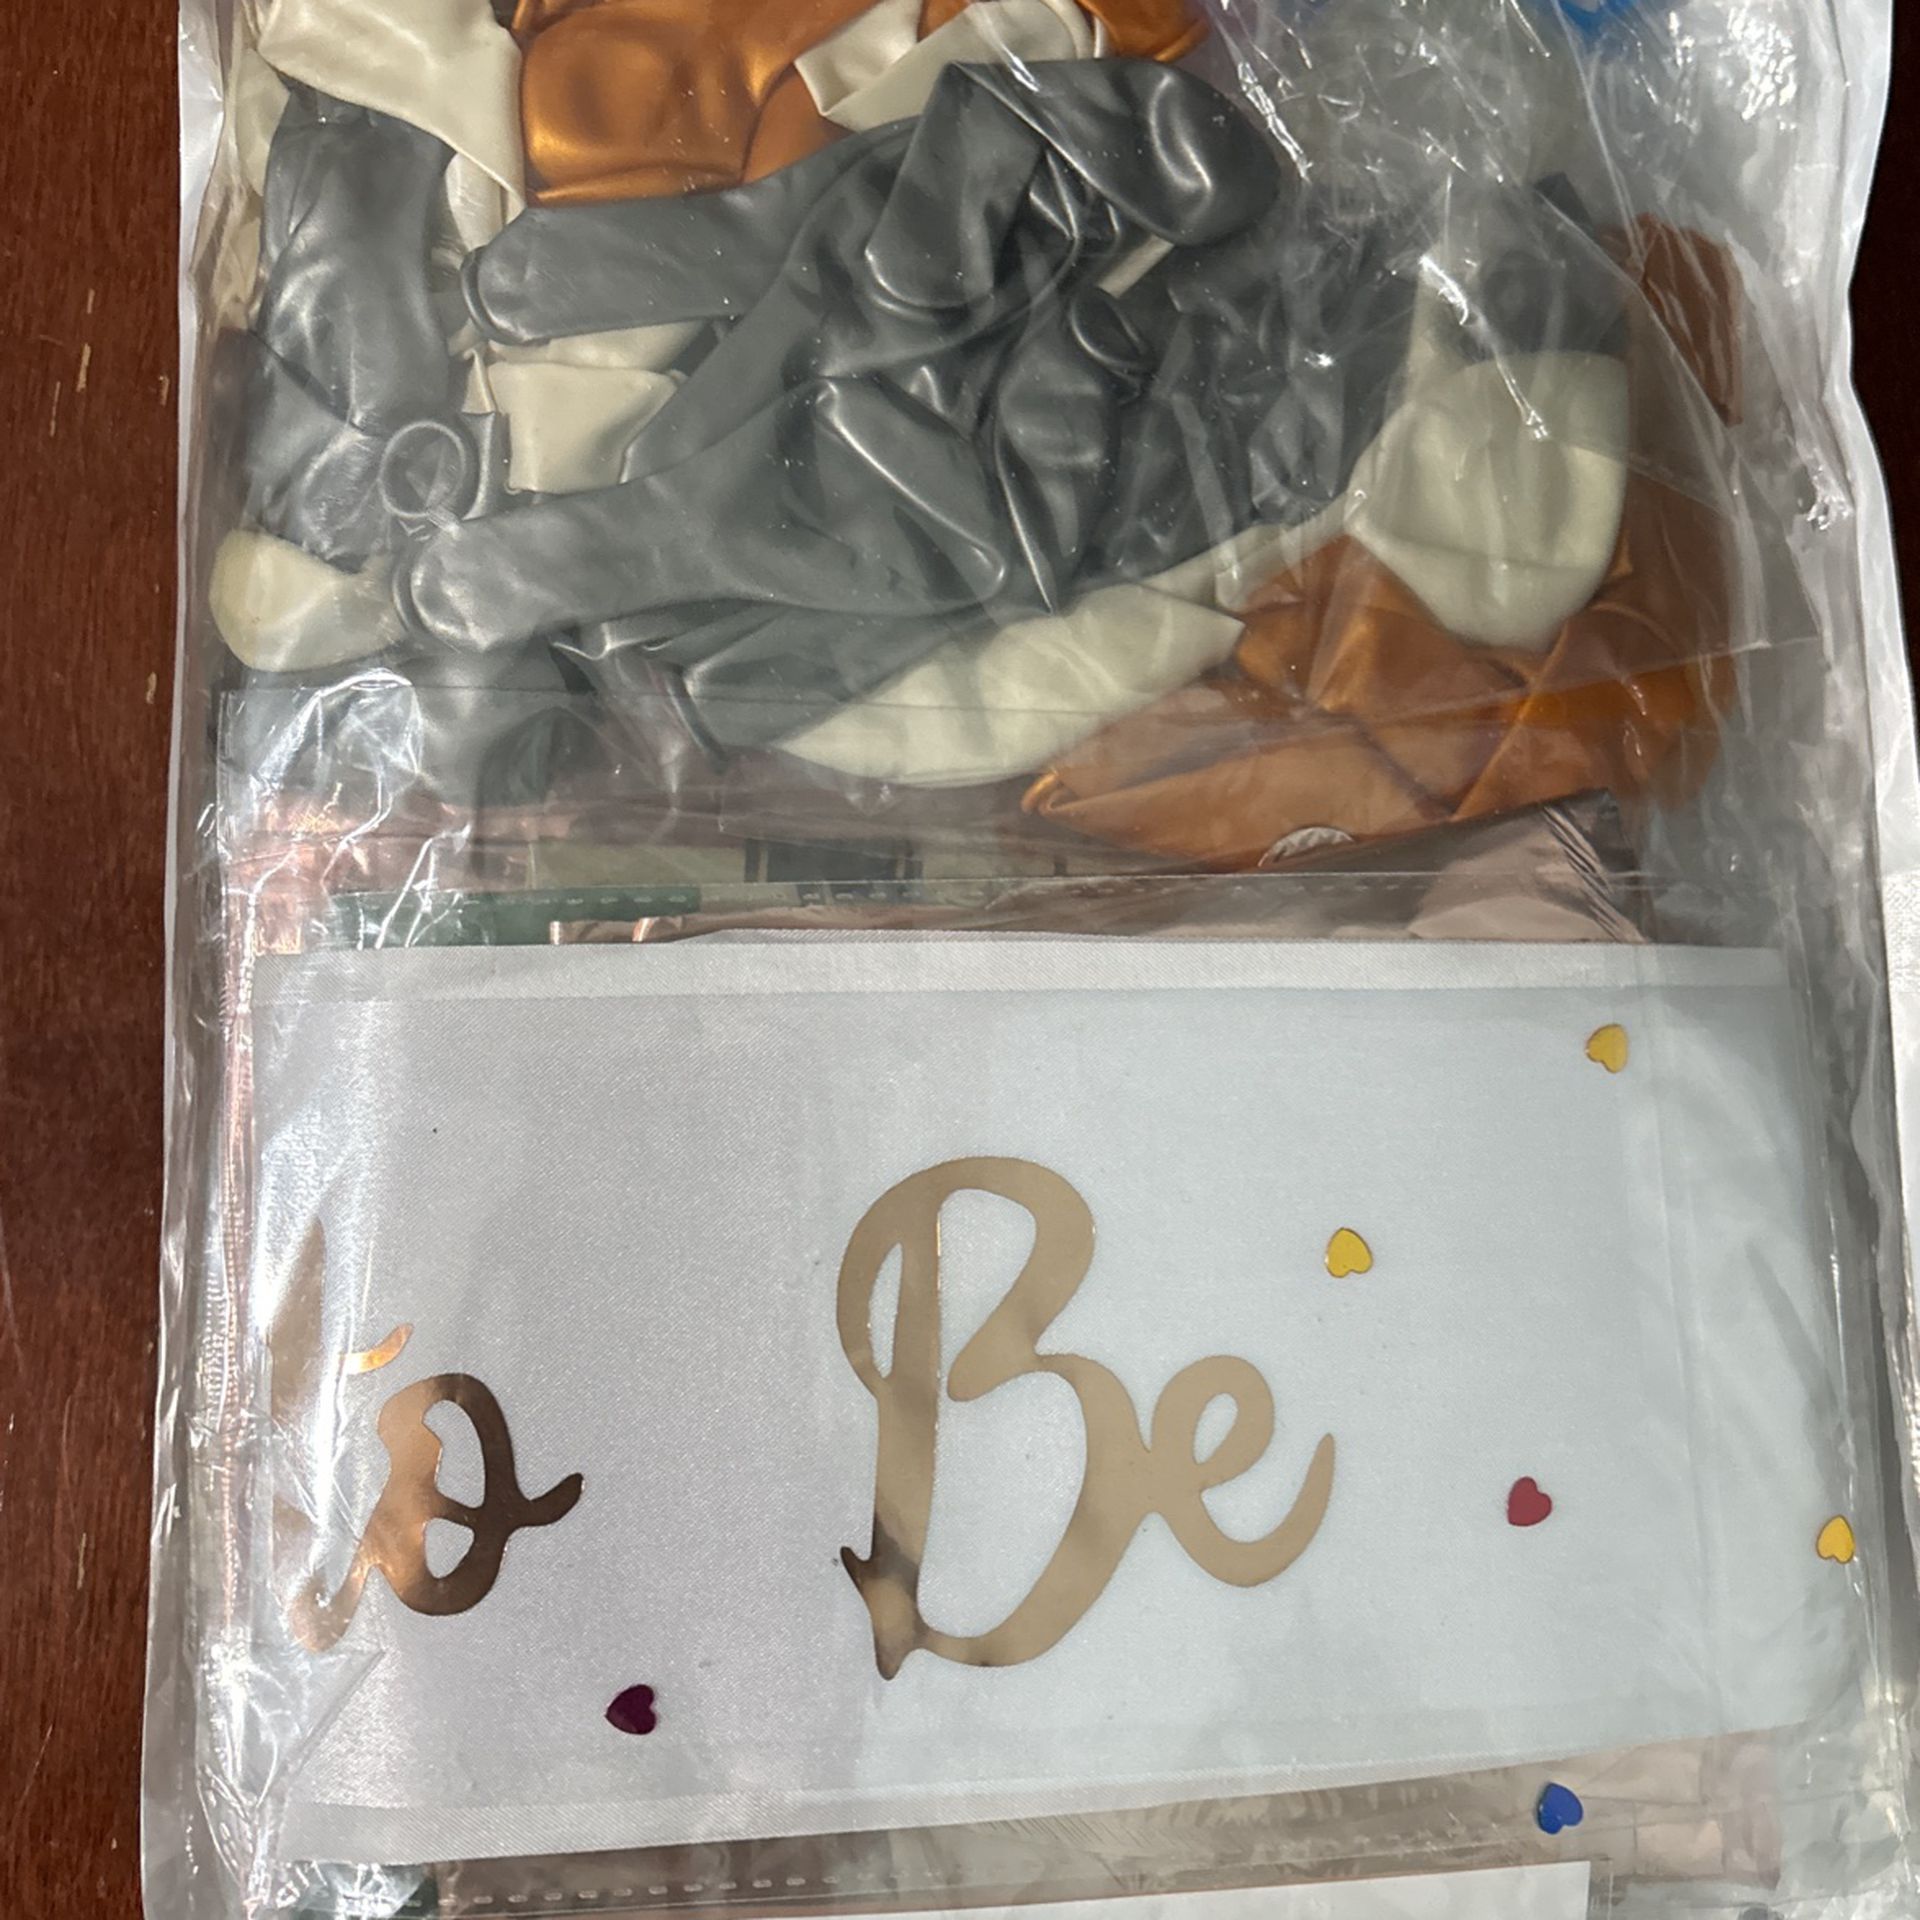 Bride To be Party Decoration Bag-  $10